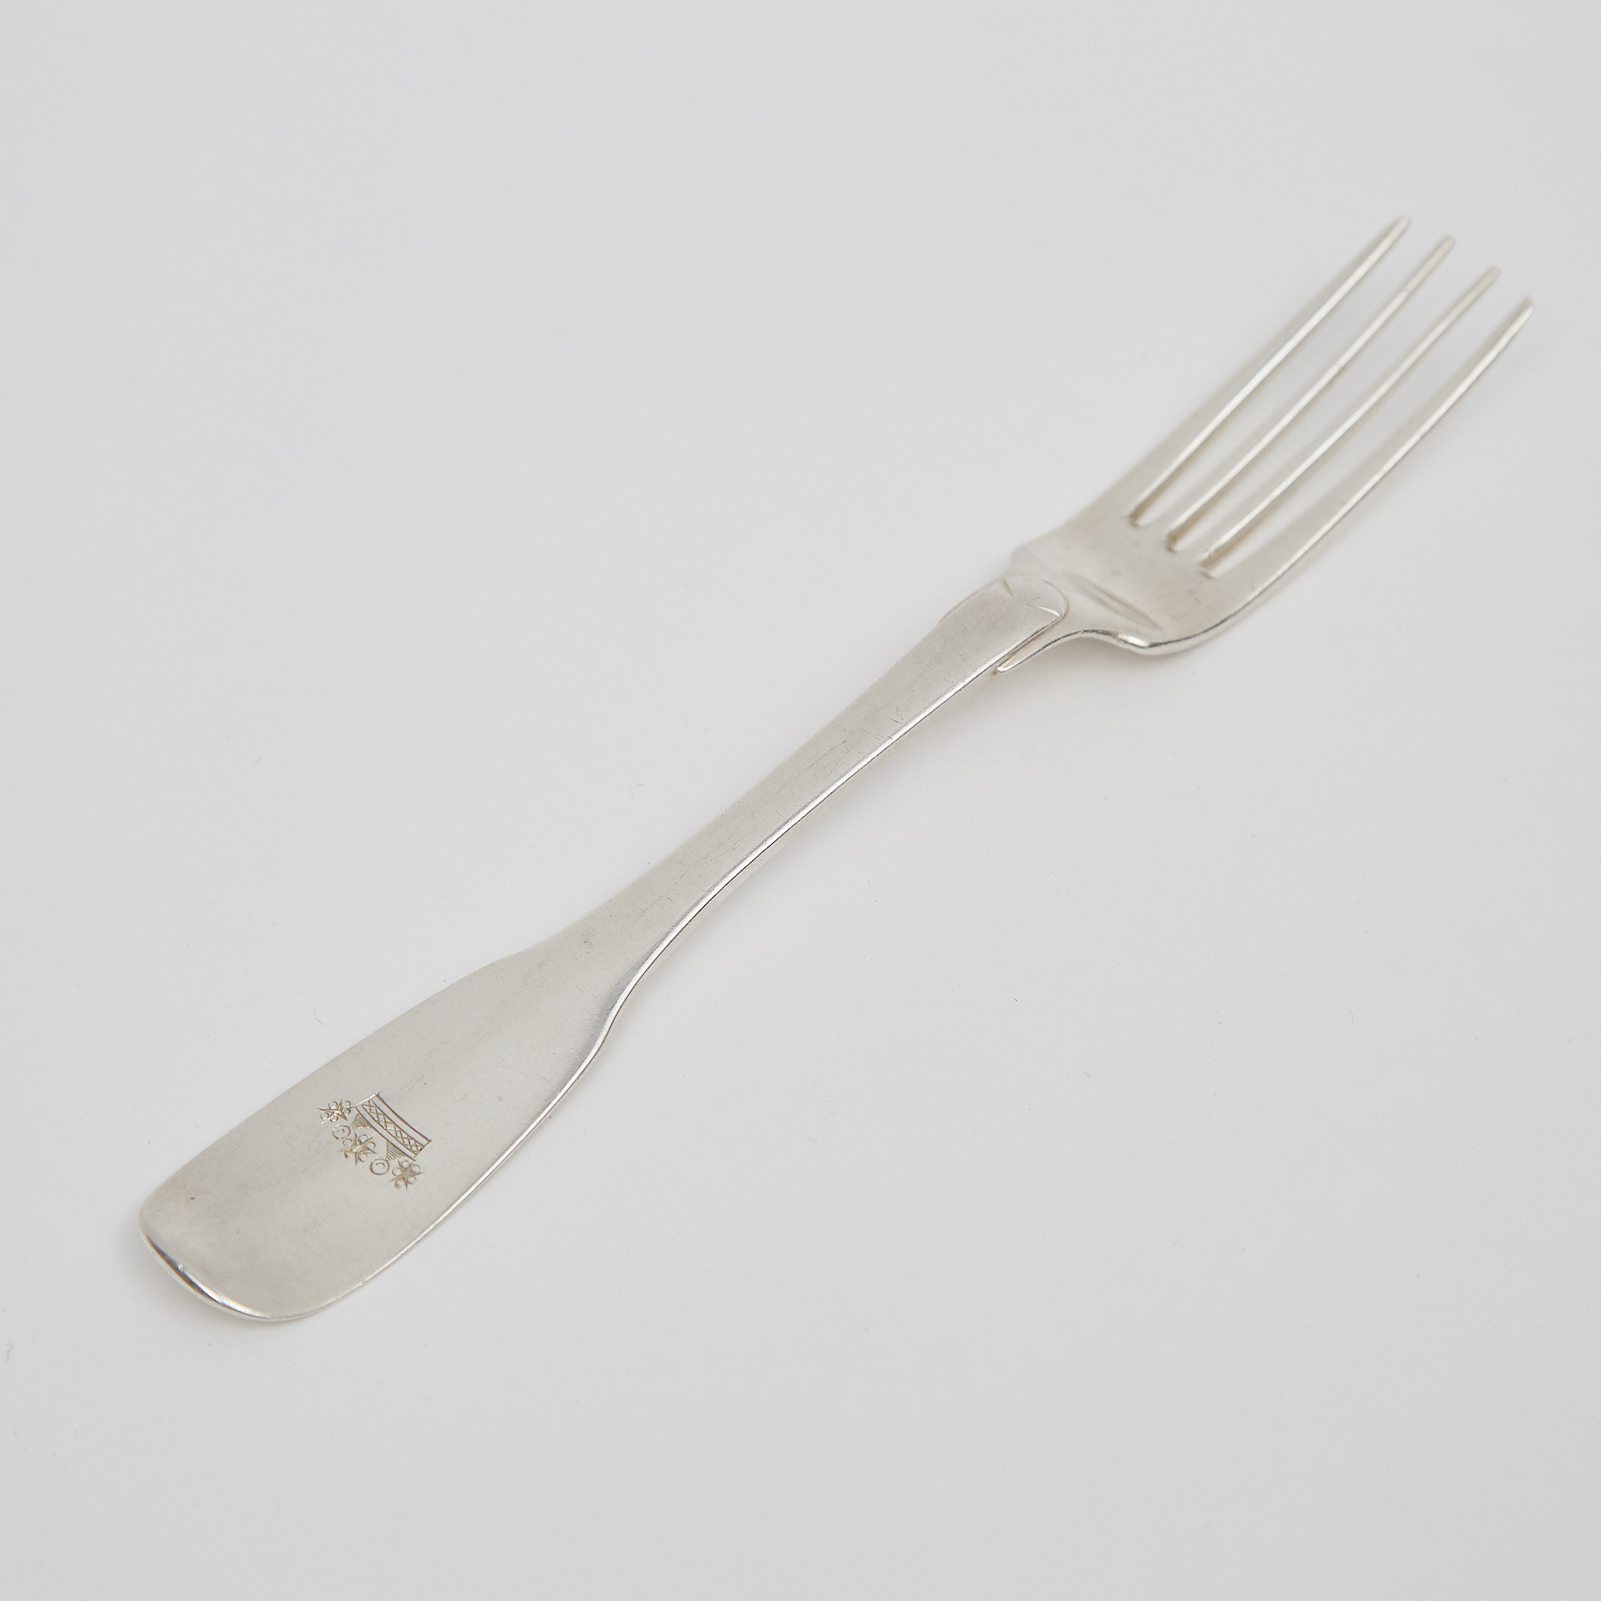 Canadian Silver Fiddle Pattern Table Fork, Jacques Varin dit Latour, Montreal, Que., late 18th century